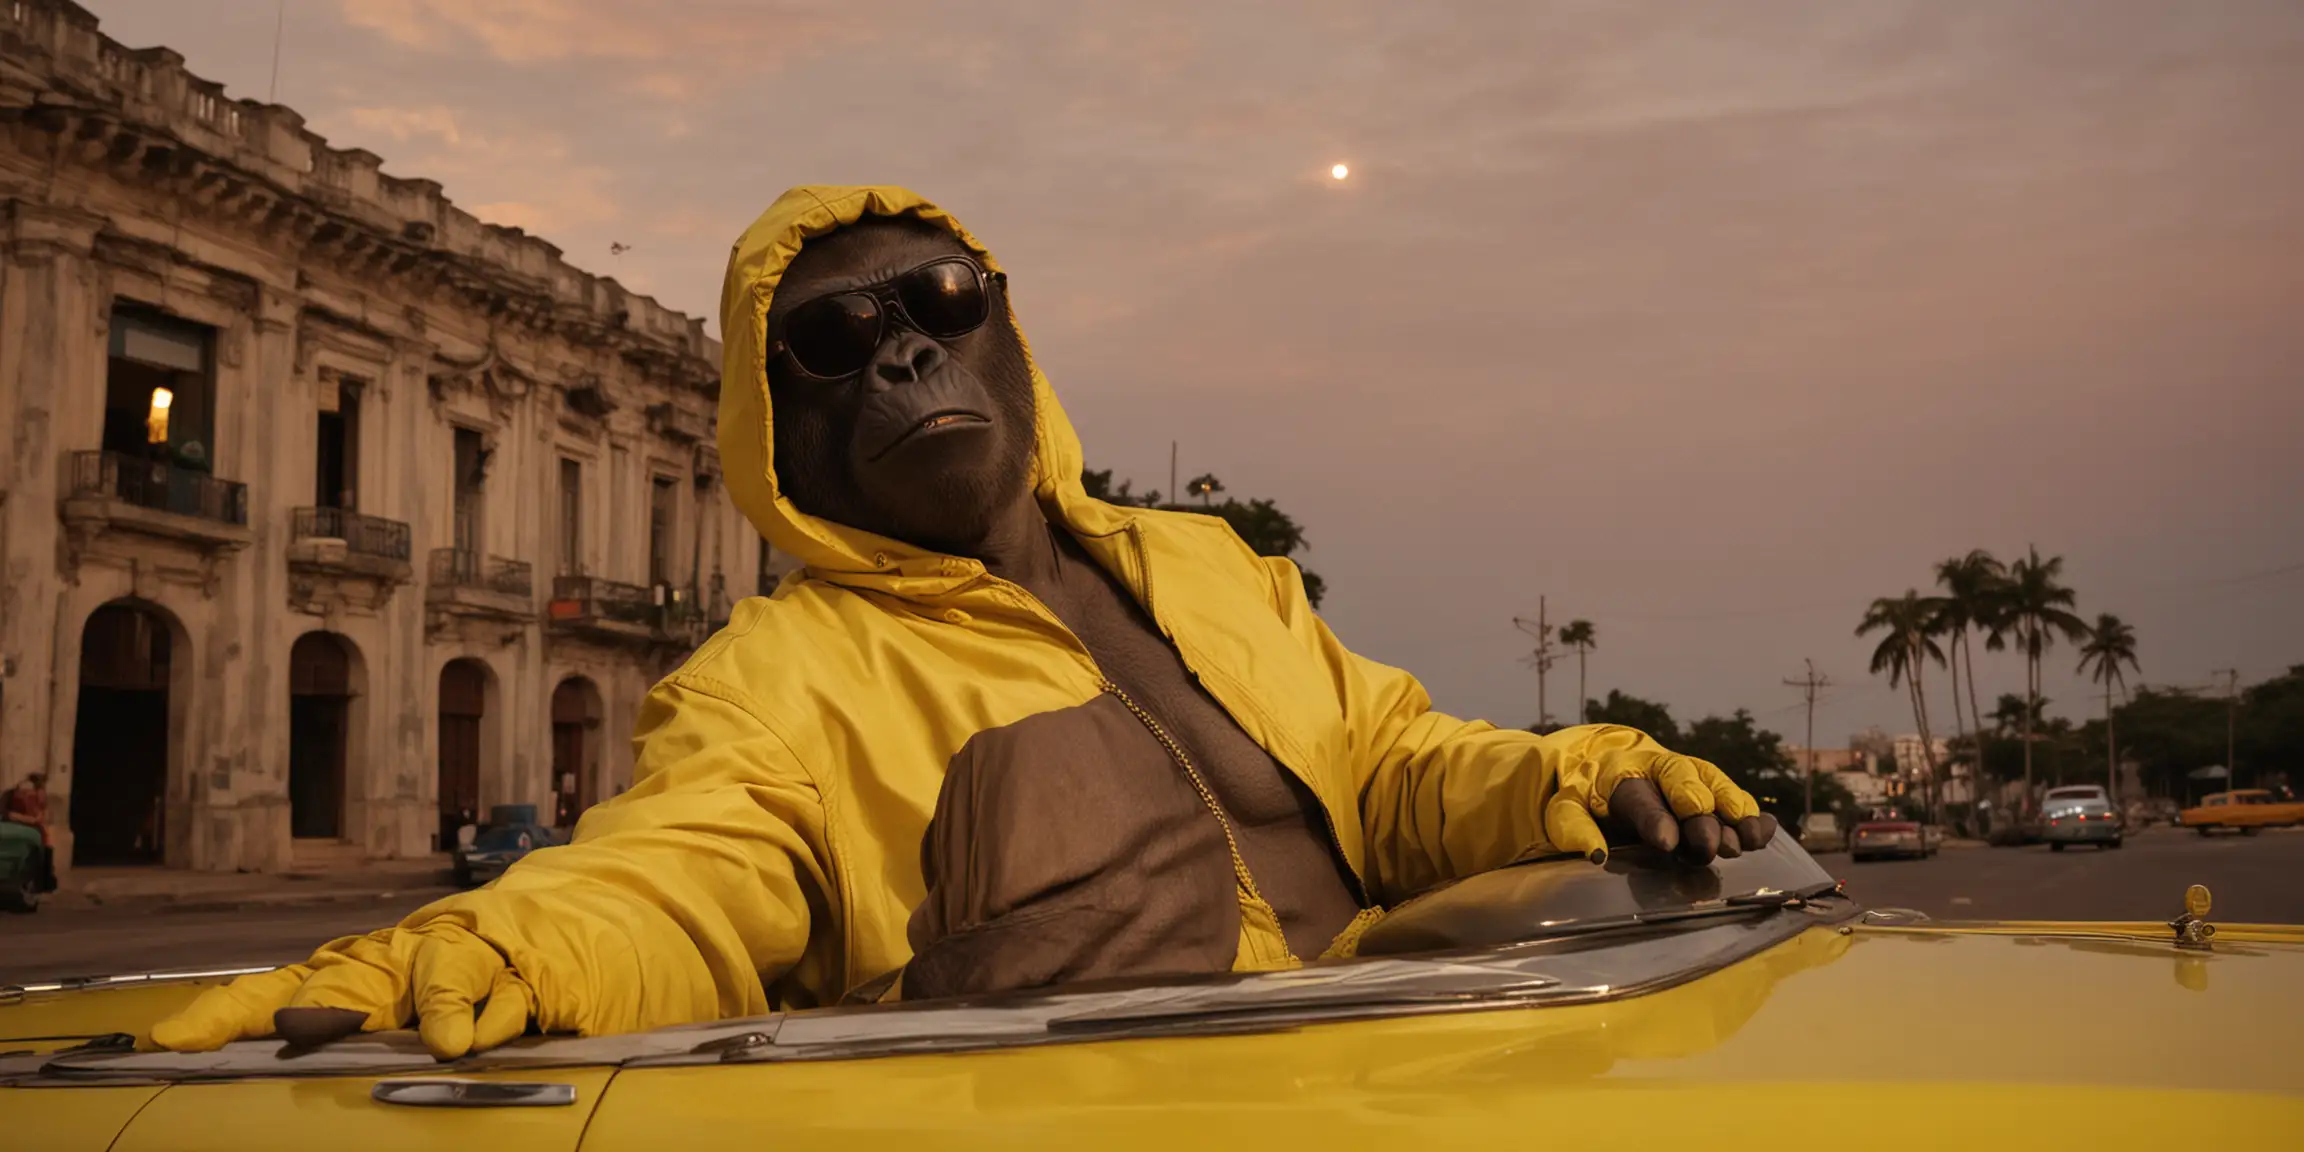 The gorilla is in La Habana, Cuba, it's sunset, and there's local architecture and vintage Cadillac cars.  The gorilla wears dark sunglasses  and a yellow jumpsuit like the one in the Breaking Bad series. His head is covered by the yellow hood. His hands are covered with light blue latex gloves. .He is sitting on the drivers seat of the green car, lighting a cuban cigar, smoking. low angle POV camera view. movement. Sky is orange violet sunset afternoon.